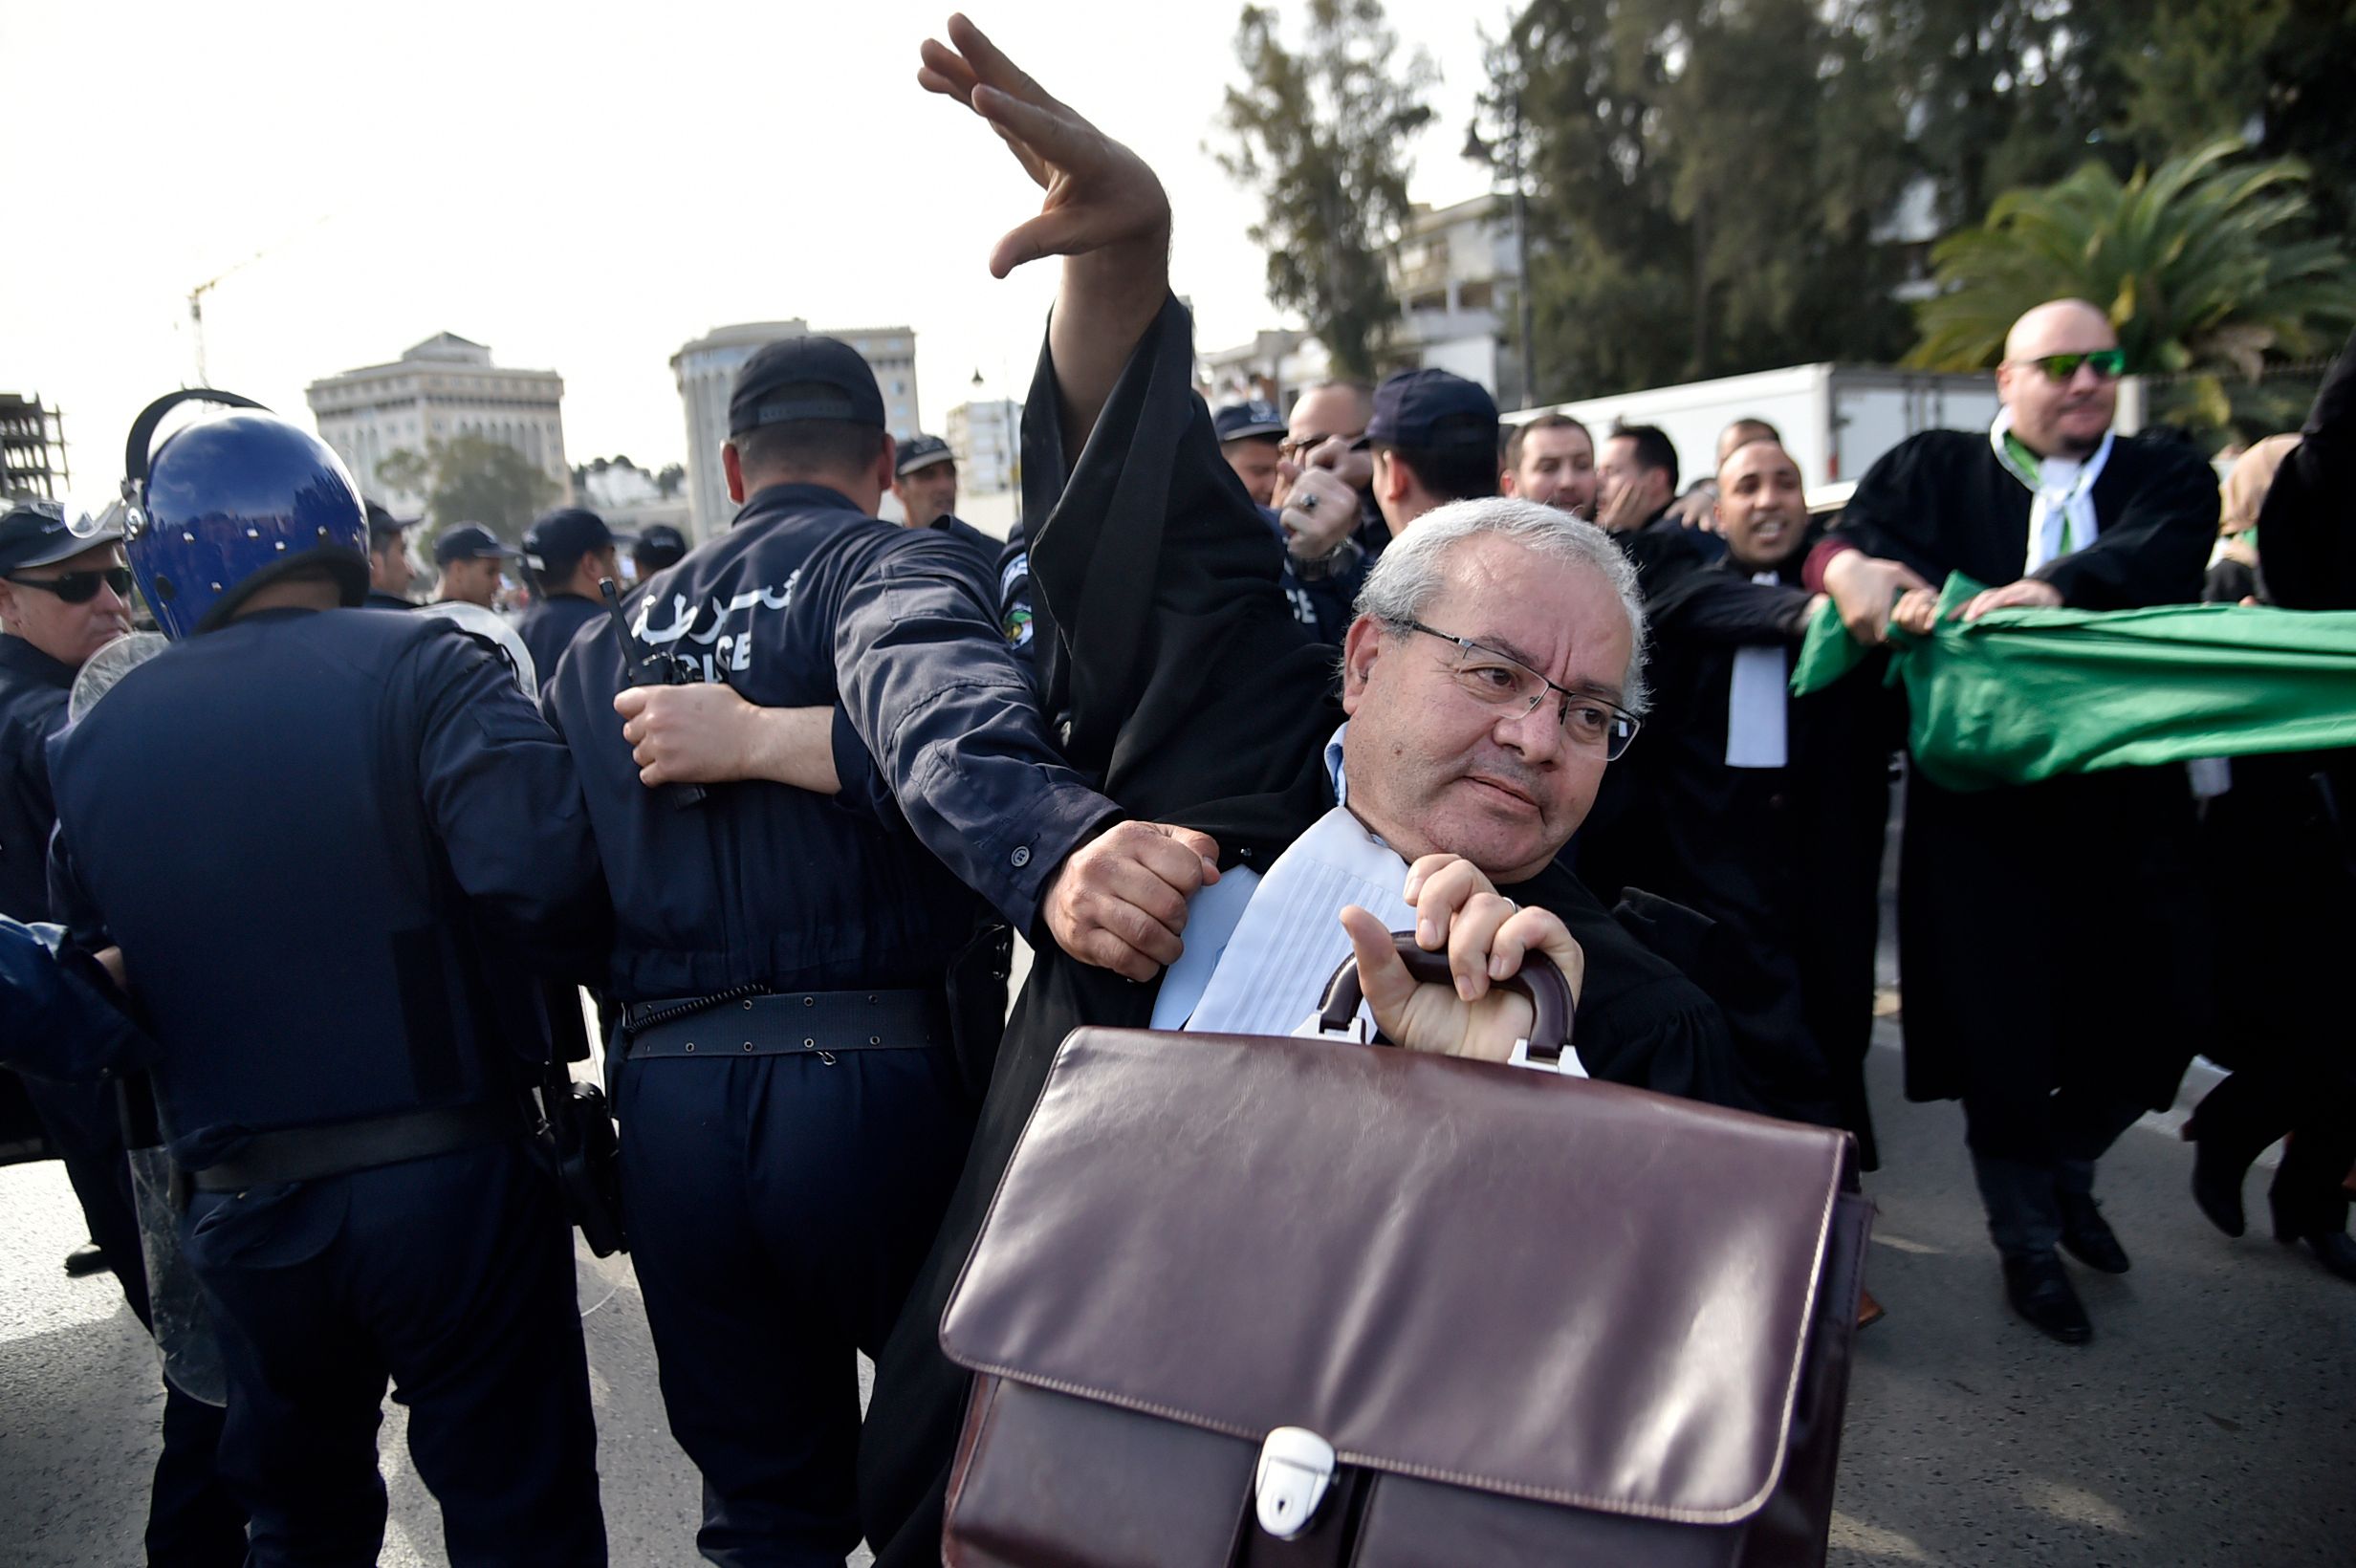 Algerian police disperse a protest by lawyers and journalists against their ailing president's bid for a fifth term in power, in Algiers on March 7, 2019.